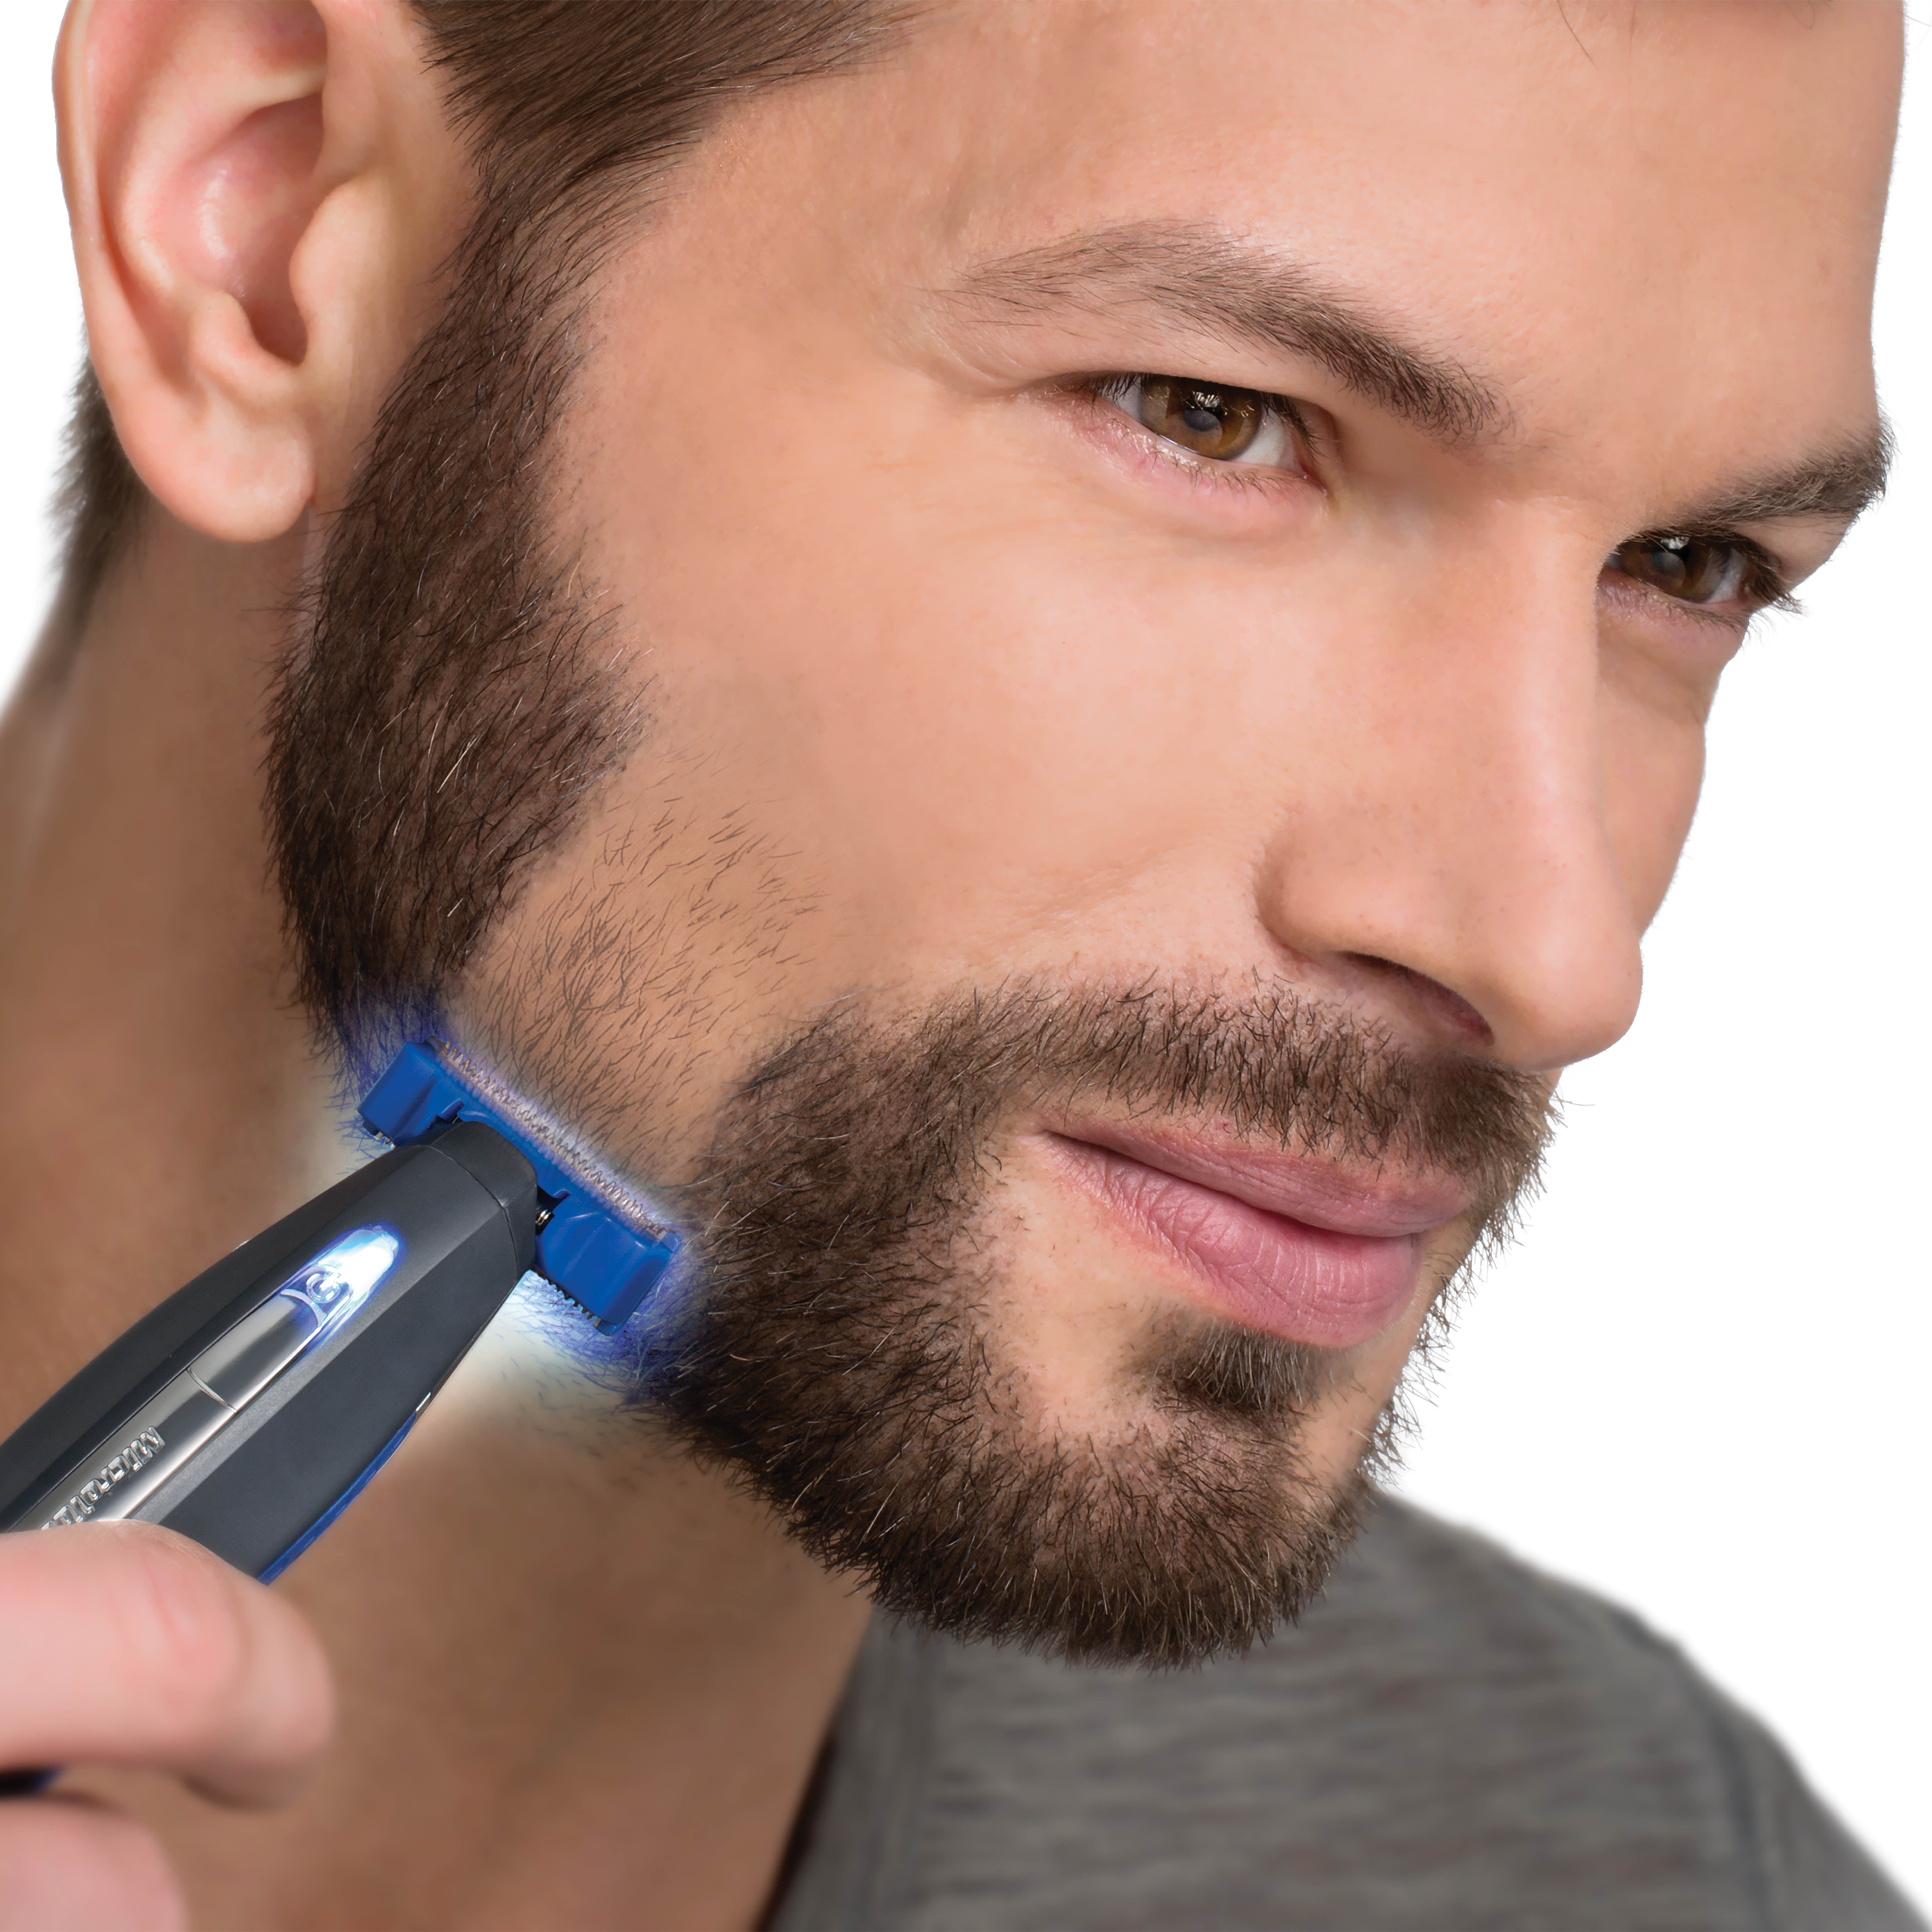 Microtouch Solo Beard Trimmer - Beard Trimmer Trims, Edges, and Shaves All  In One!